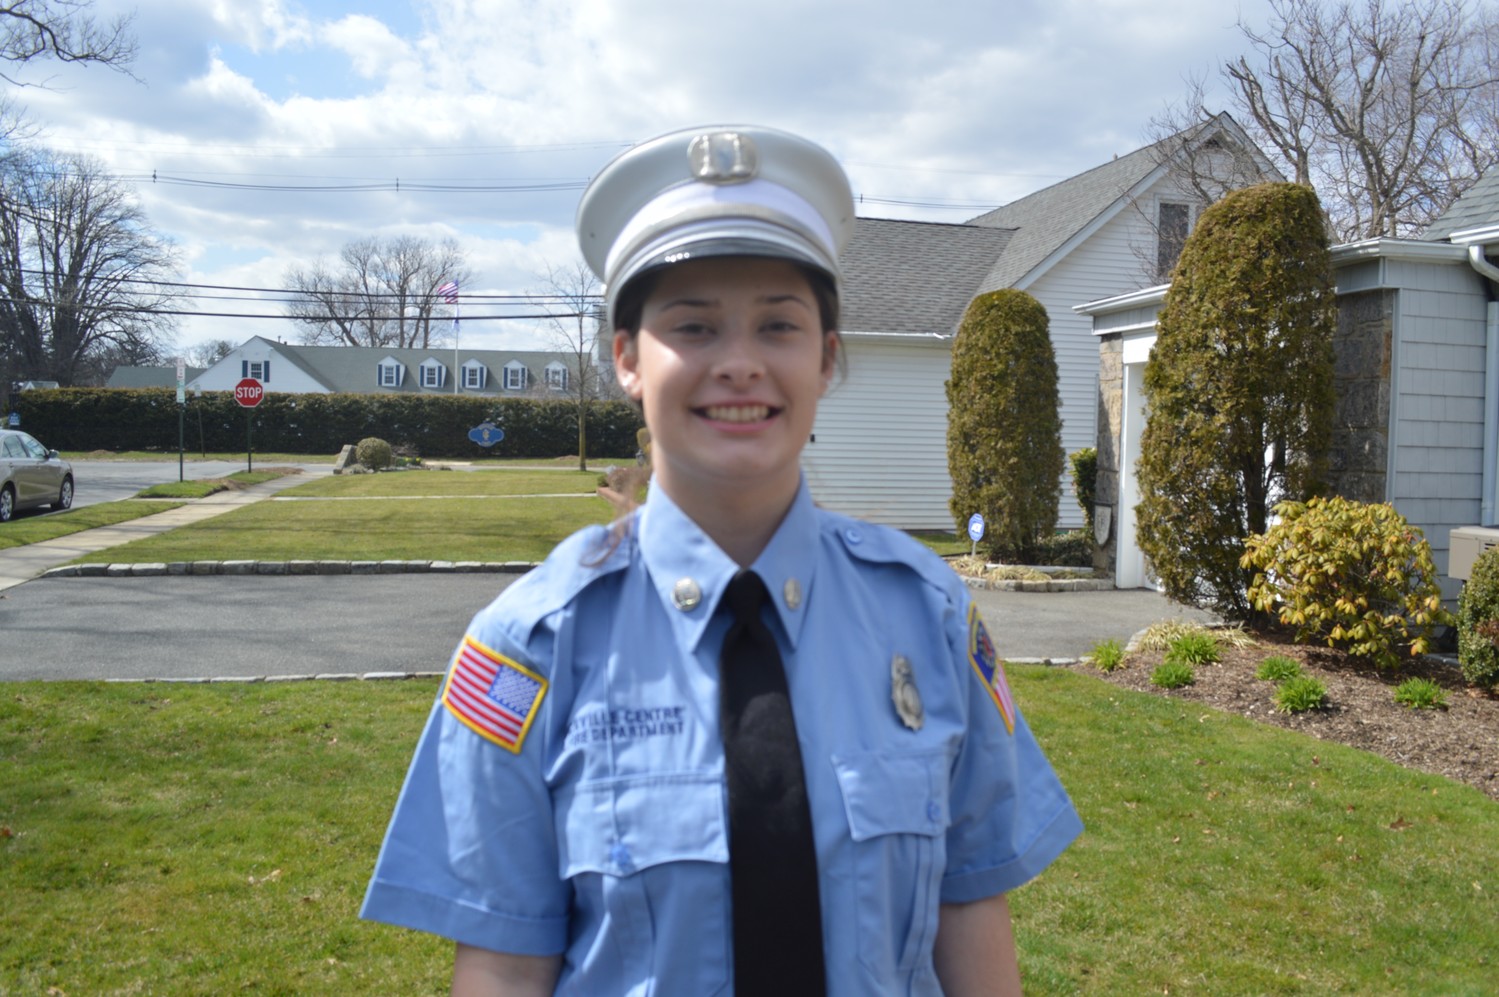 As captain of the Rockville Centre Junior Department, Erika Brancato is in charge of keeping members interested enough to transition to full-fledged firefighters.